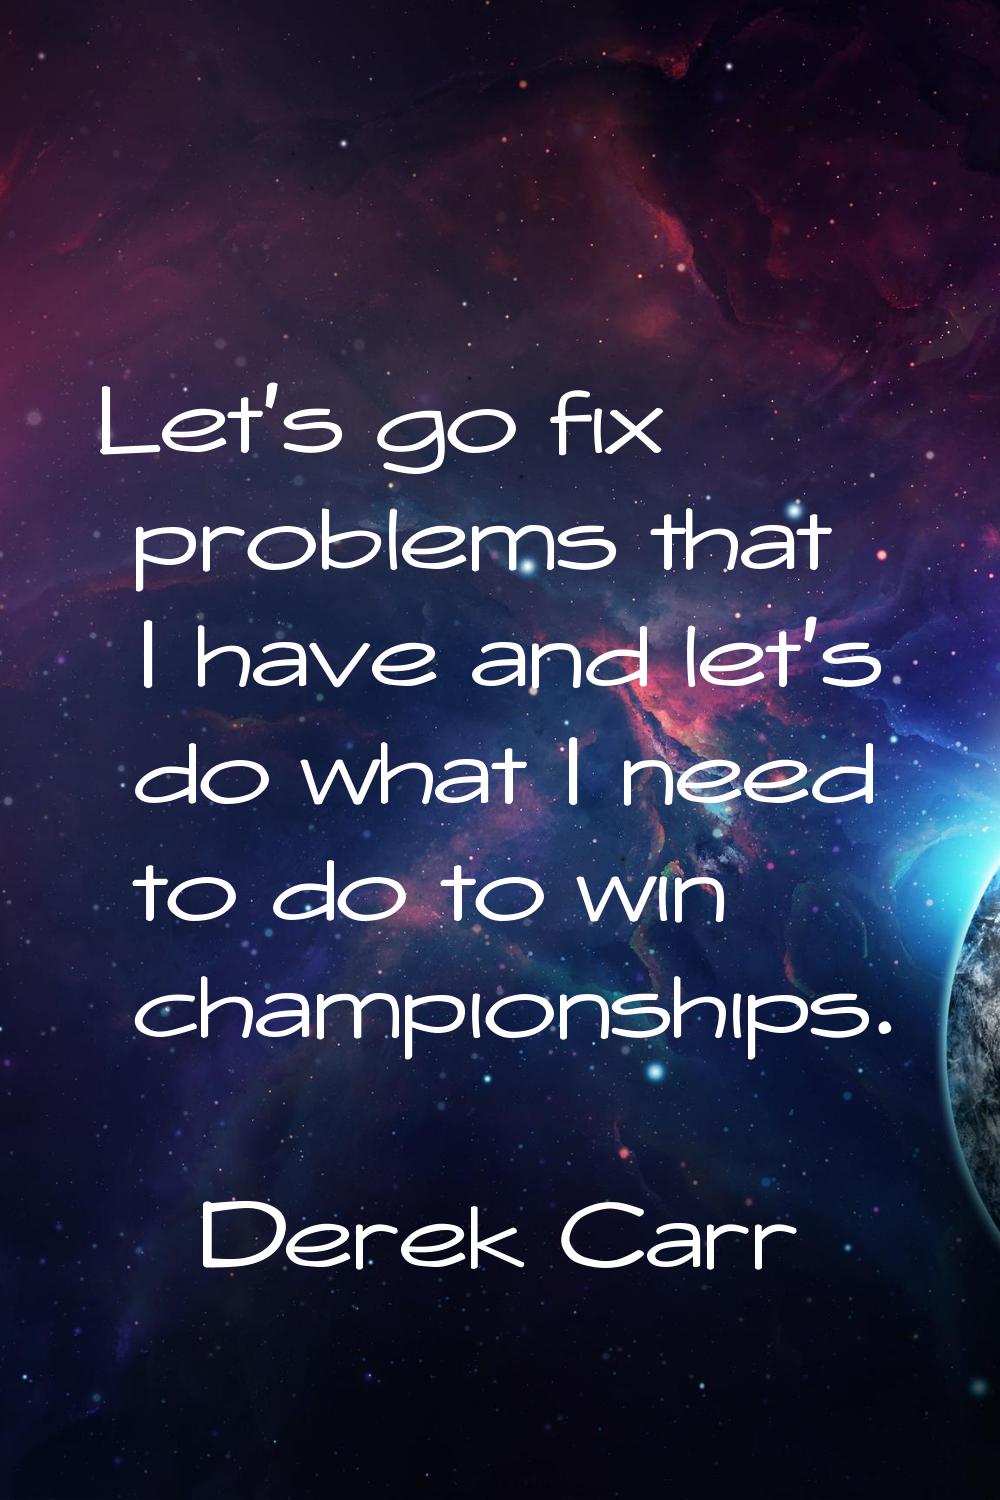 Let's go fix problems that I have and let's do what I need to do to win championships.